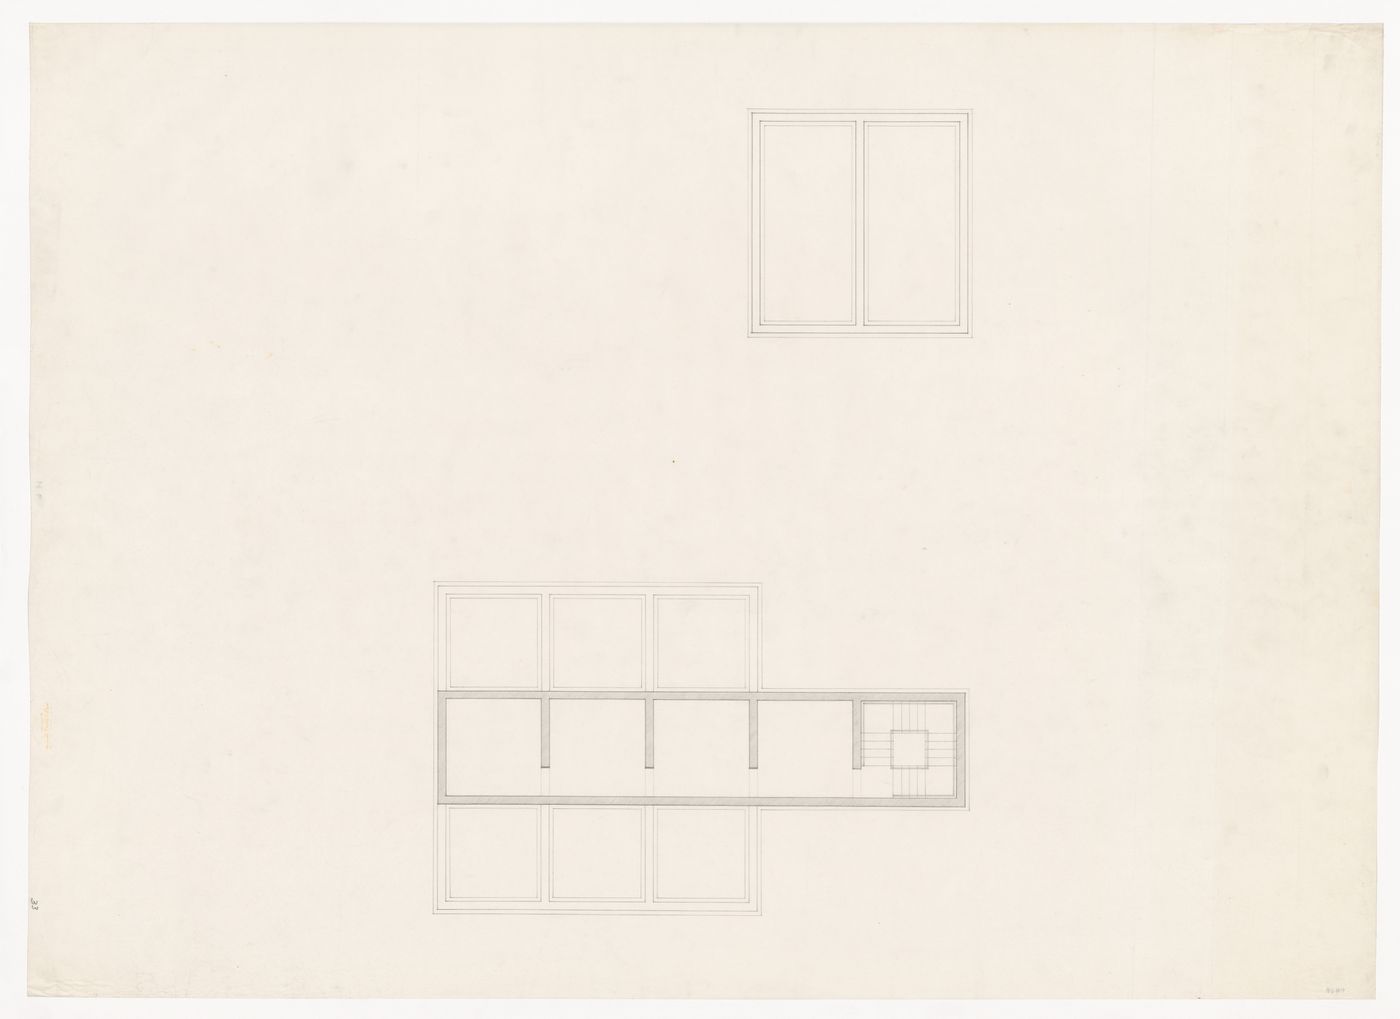 Plan and elevation for Texas House 6